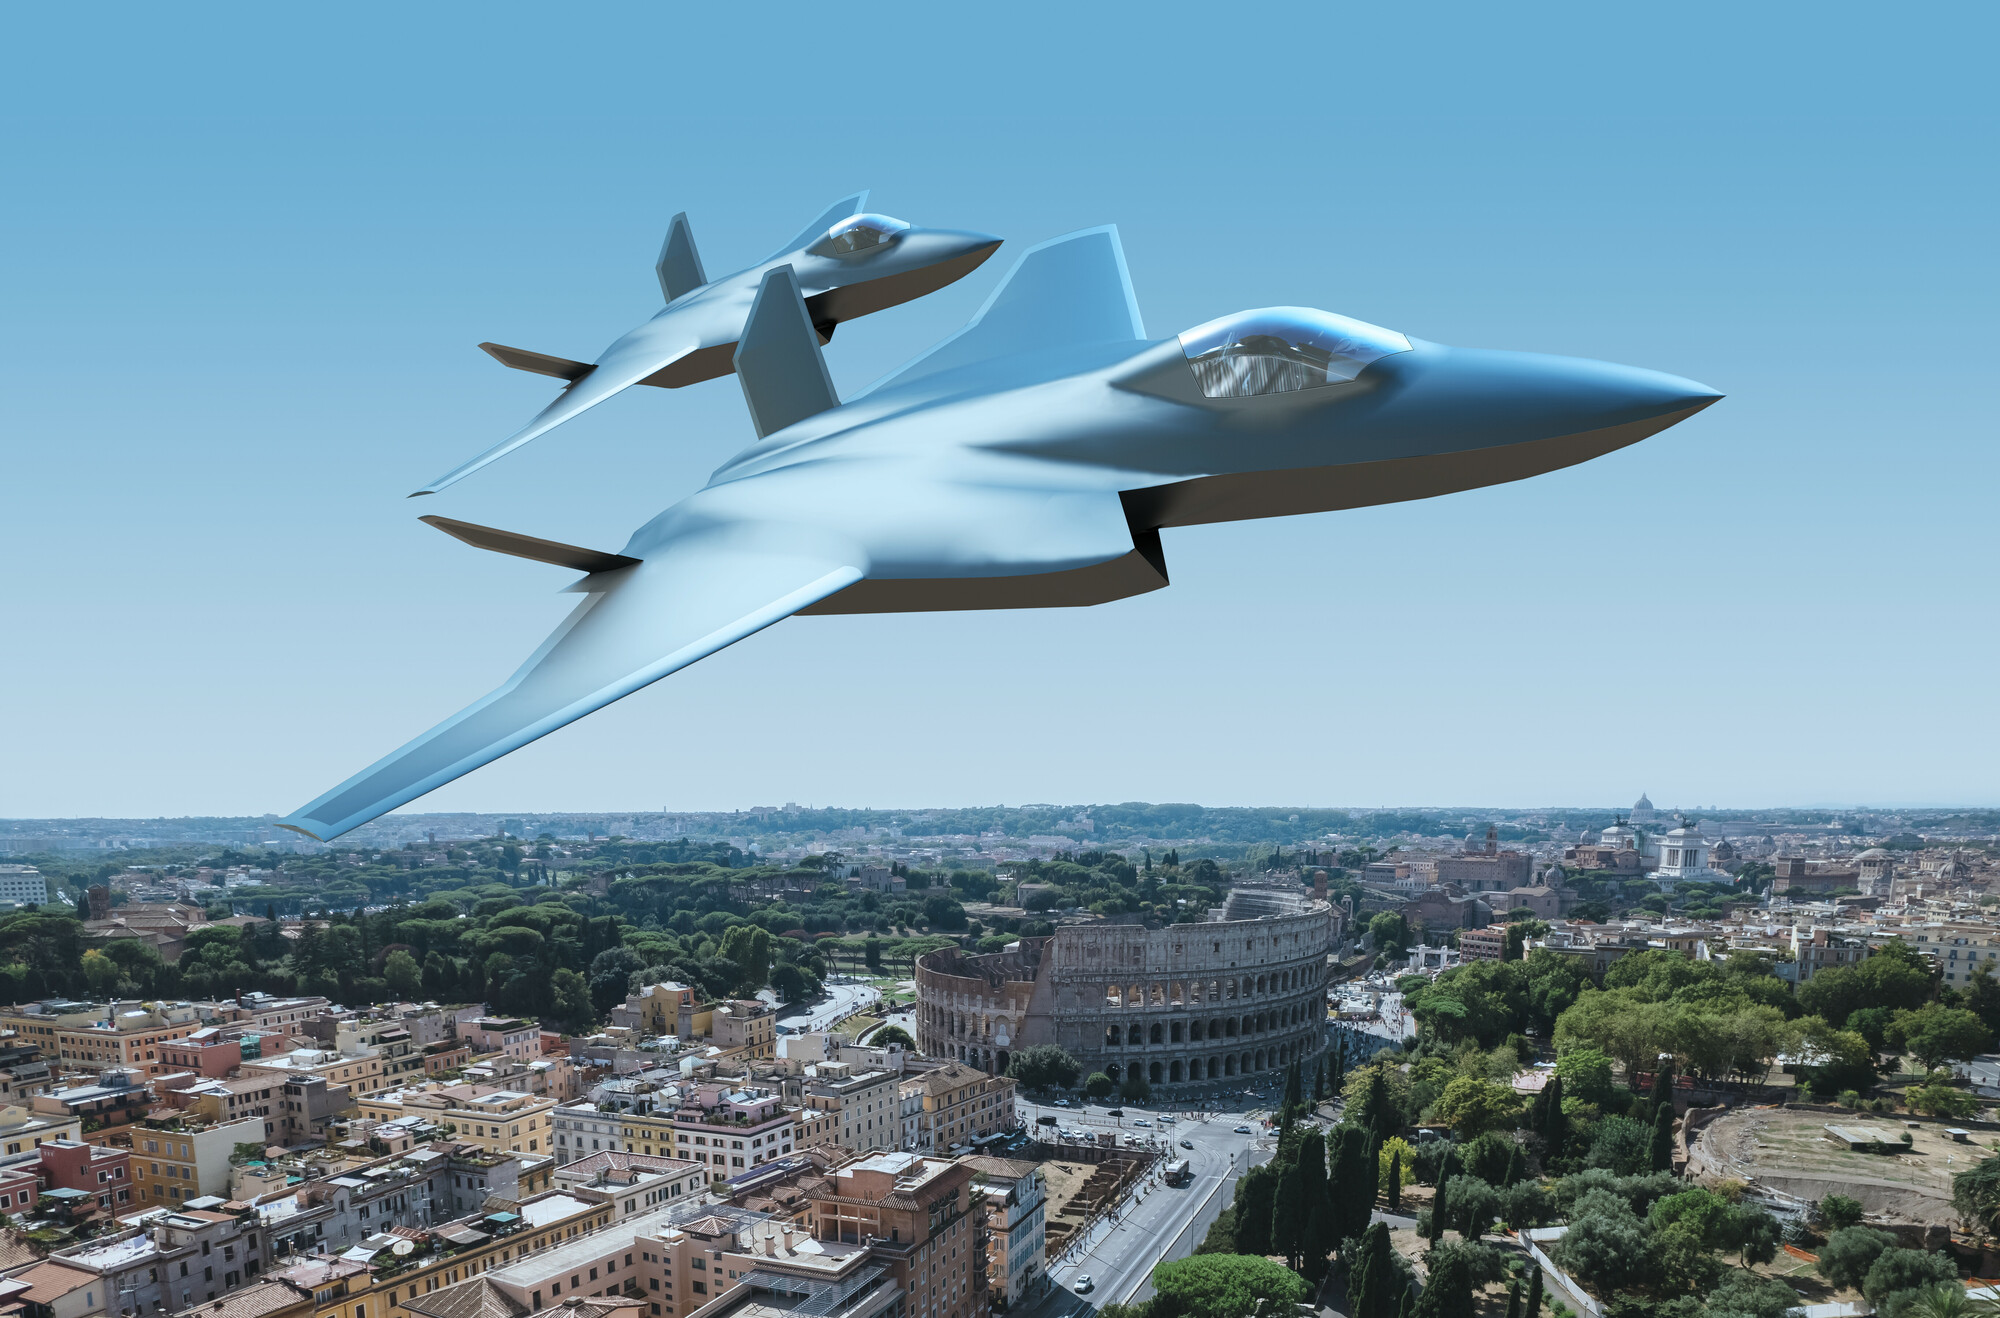 Image shows graphic of future fighter jets flying over Italy.